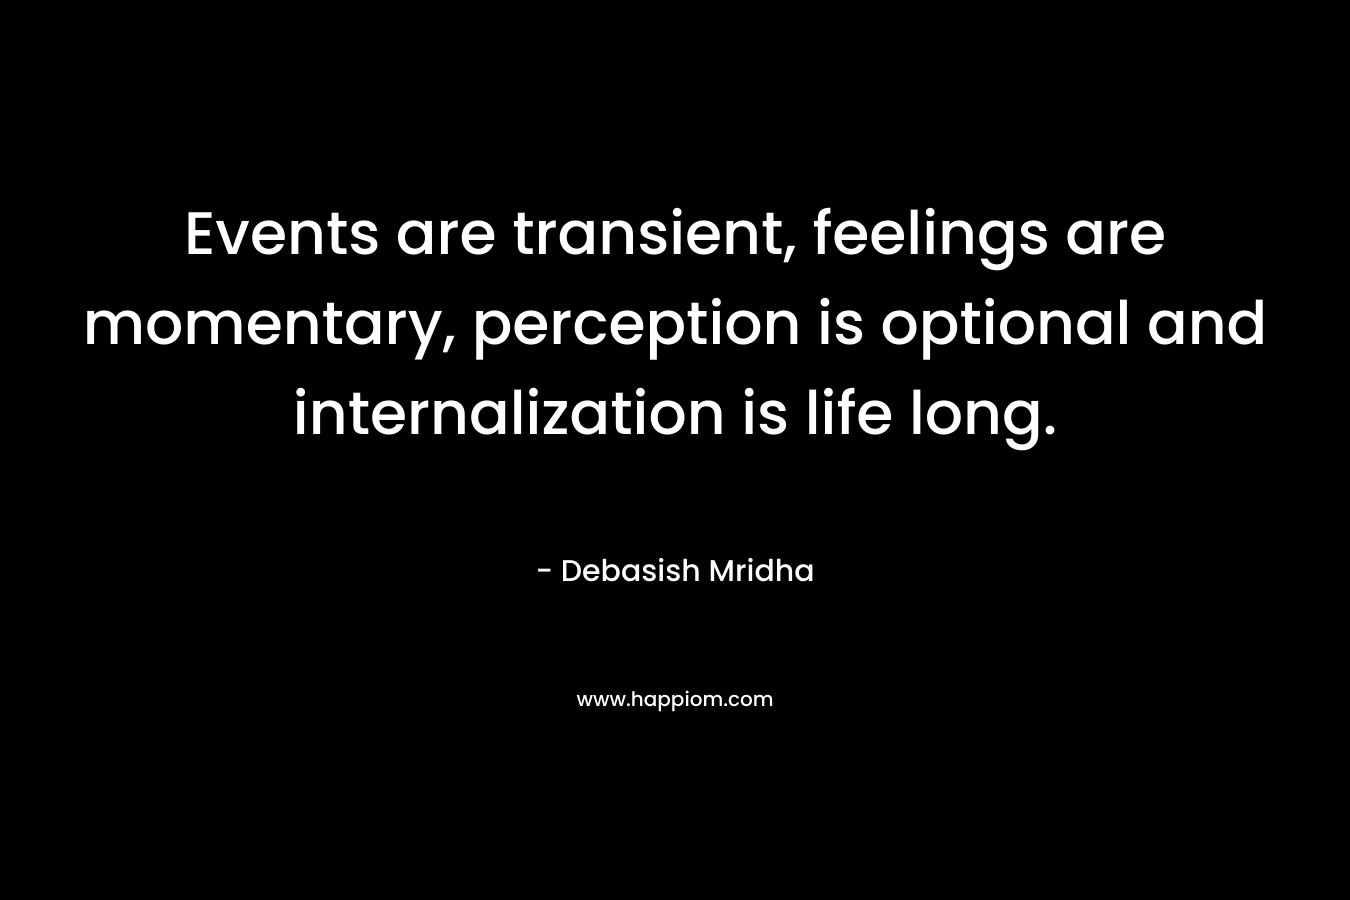 Events are transient, feelings are momentary, perception is optional and internalization is life long. – Debasish Mridha